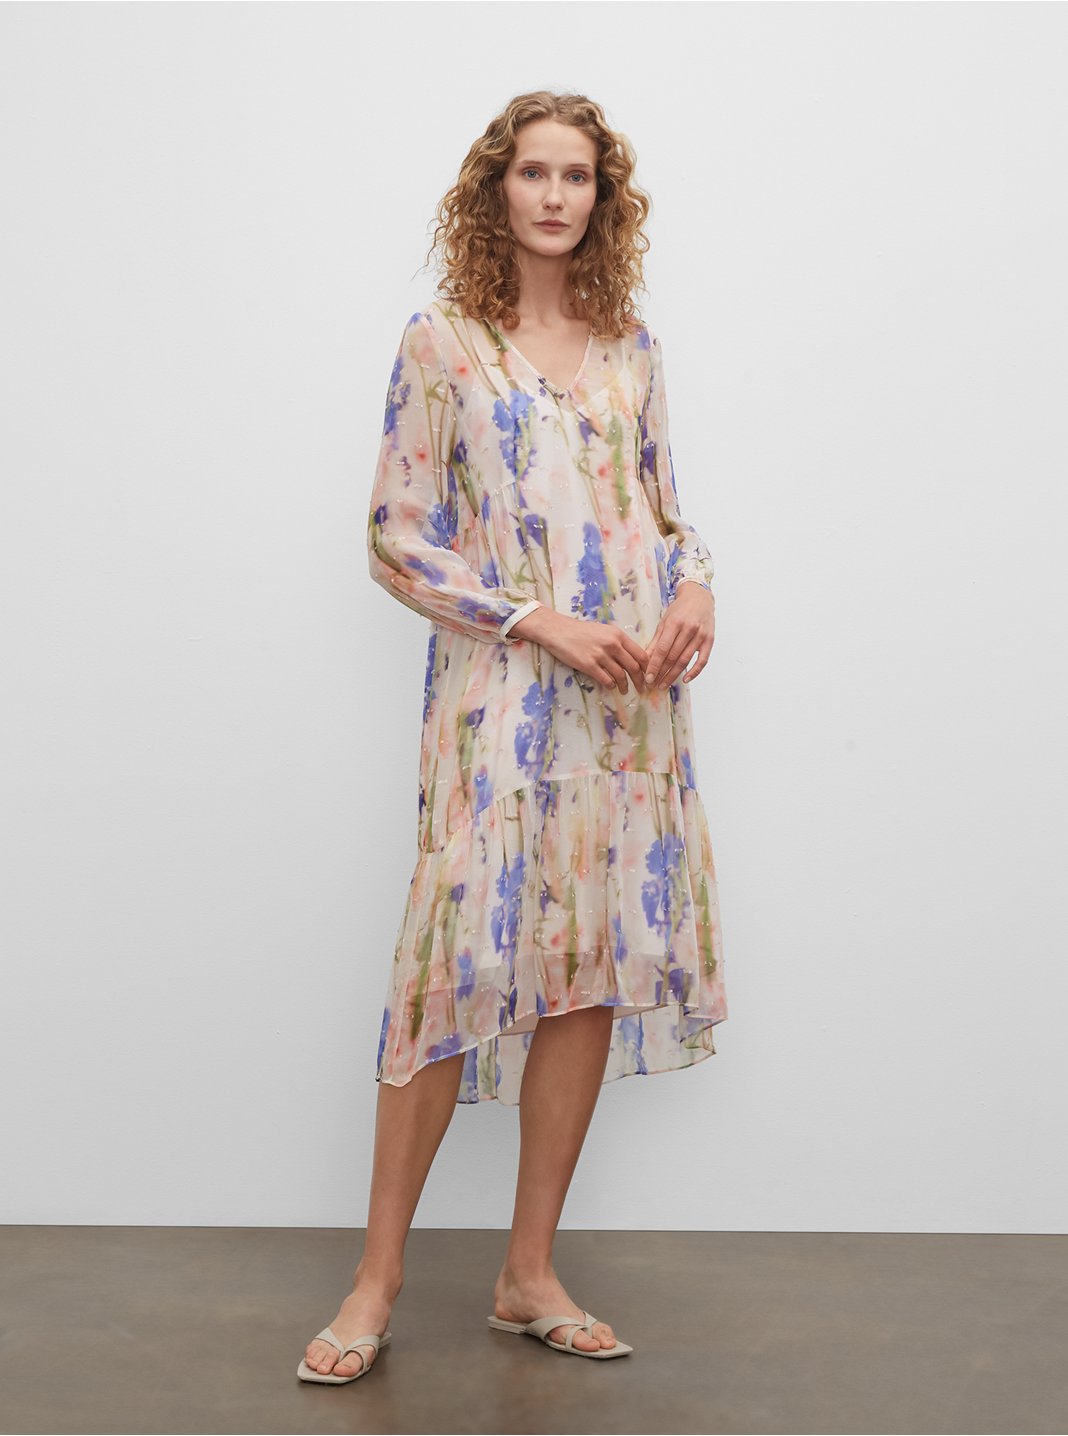 Clubmonaco Floral Tiered Dress